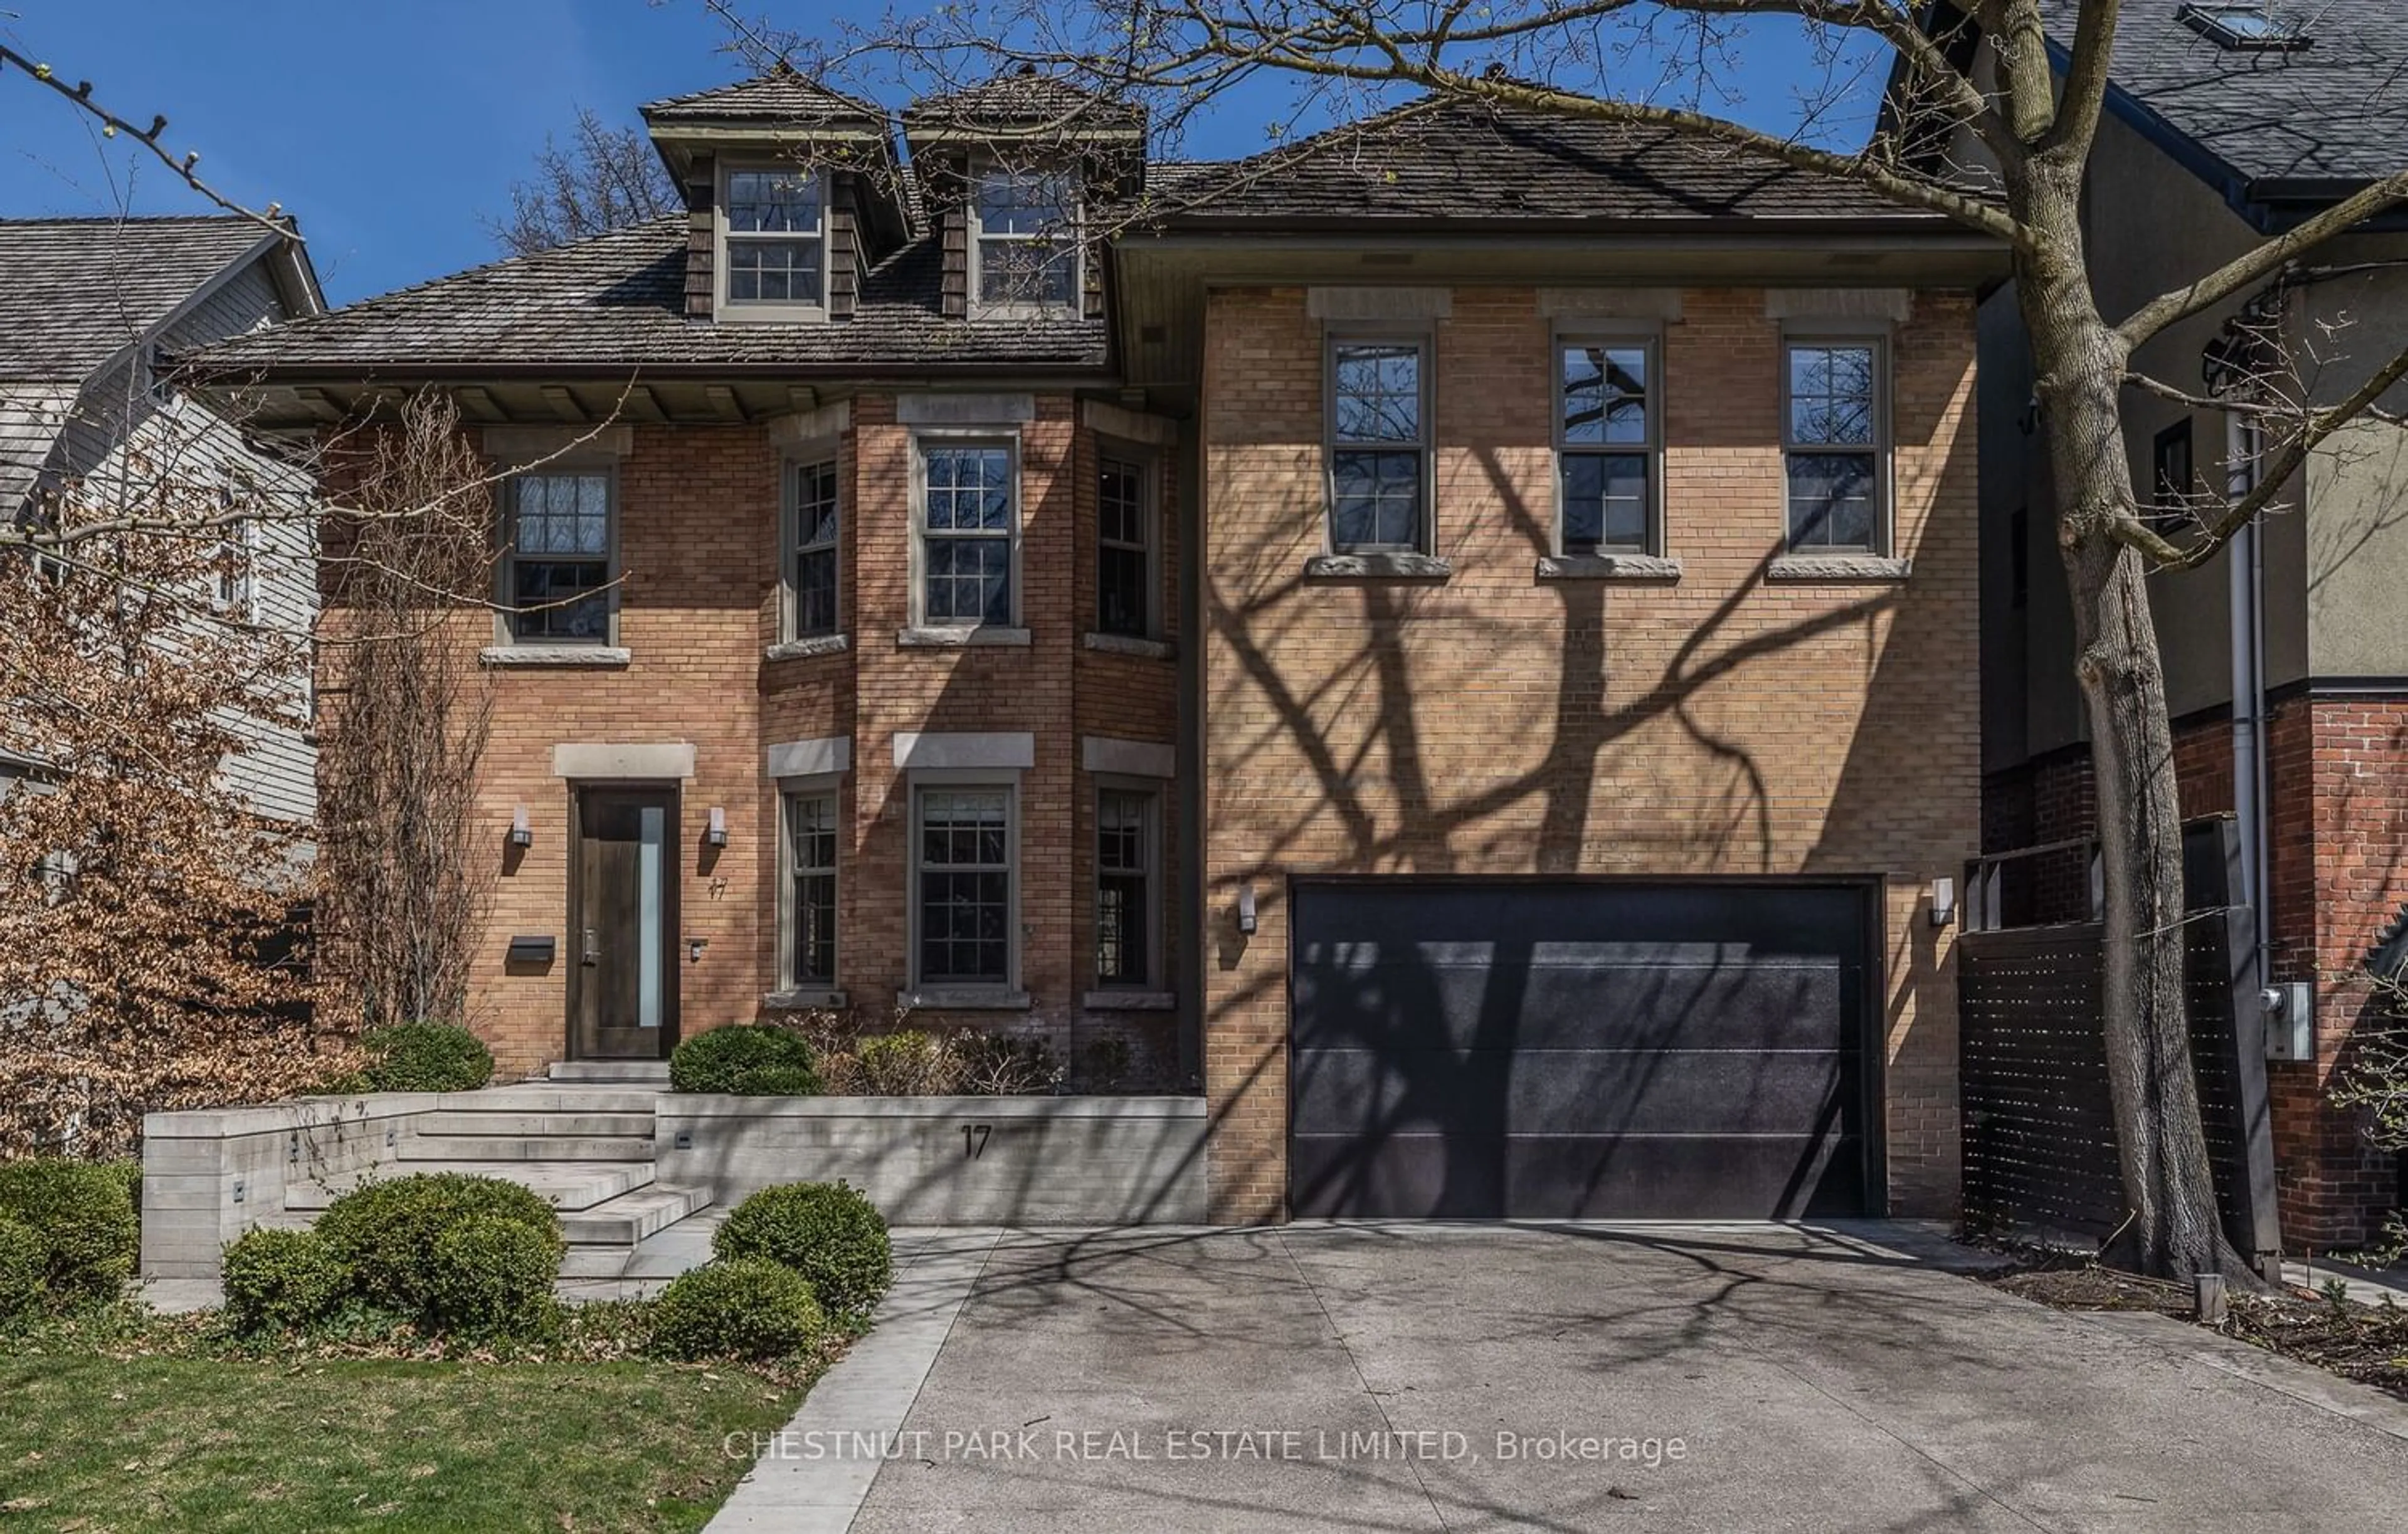 Home with brick exterior material for 17 Warren Rd, Toronto Ontario M4V 2R4